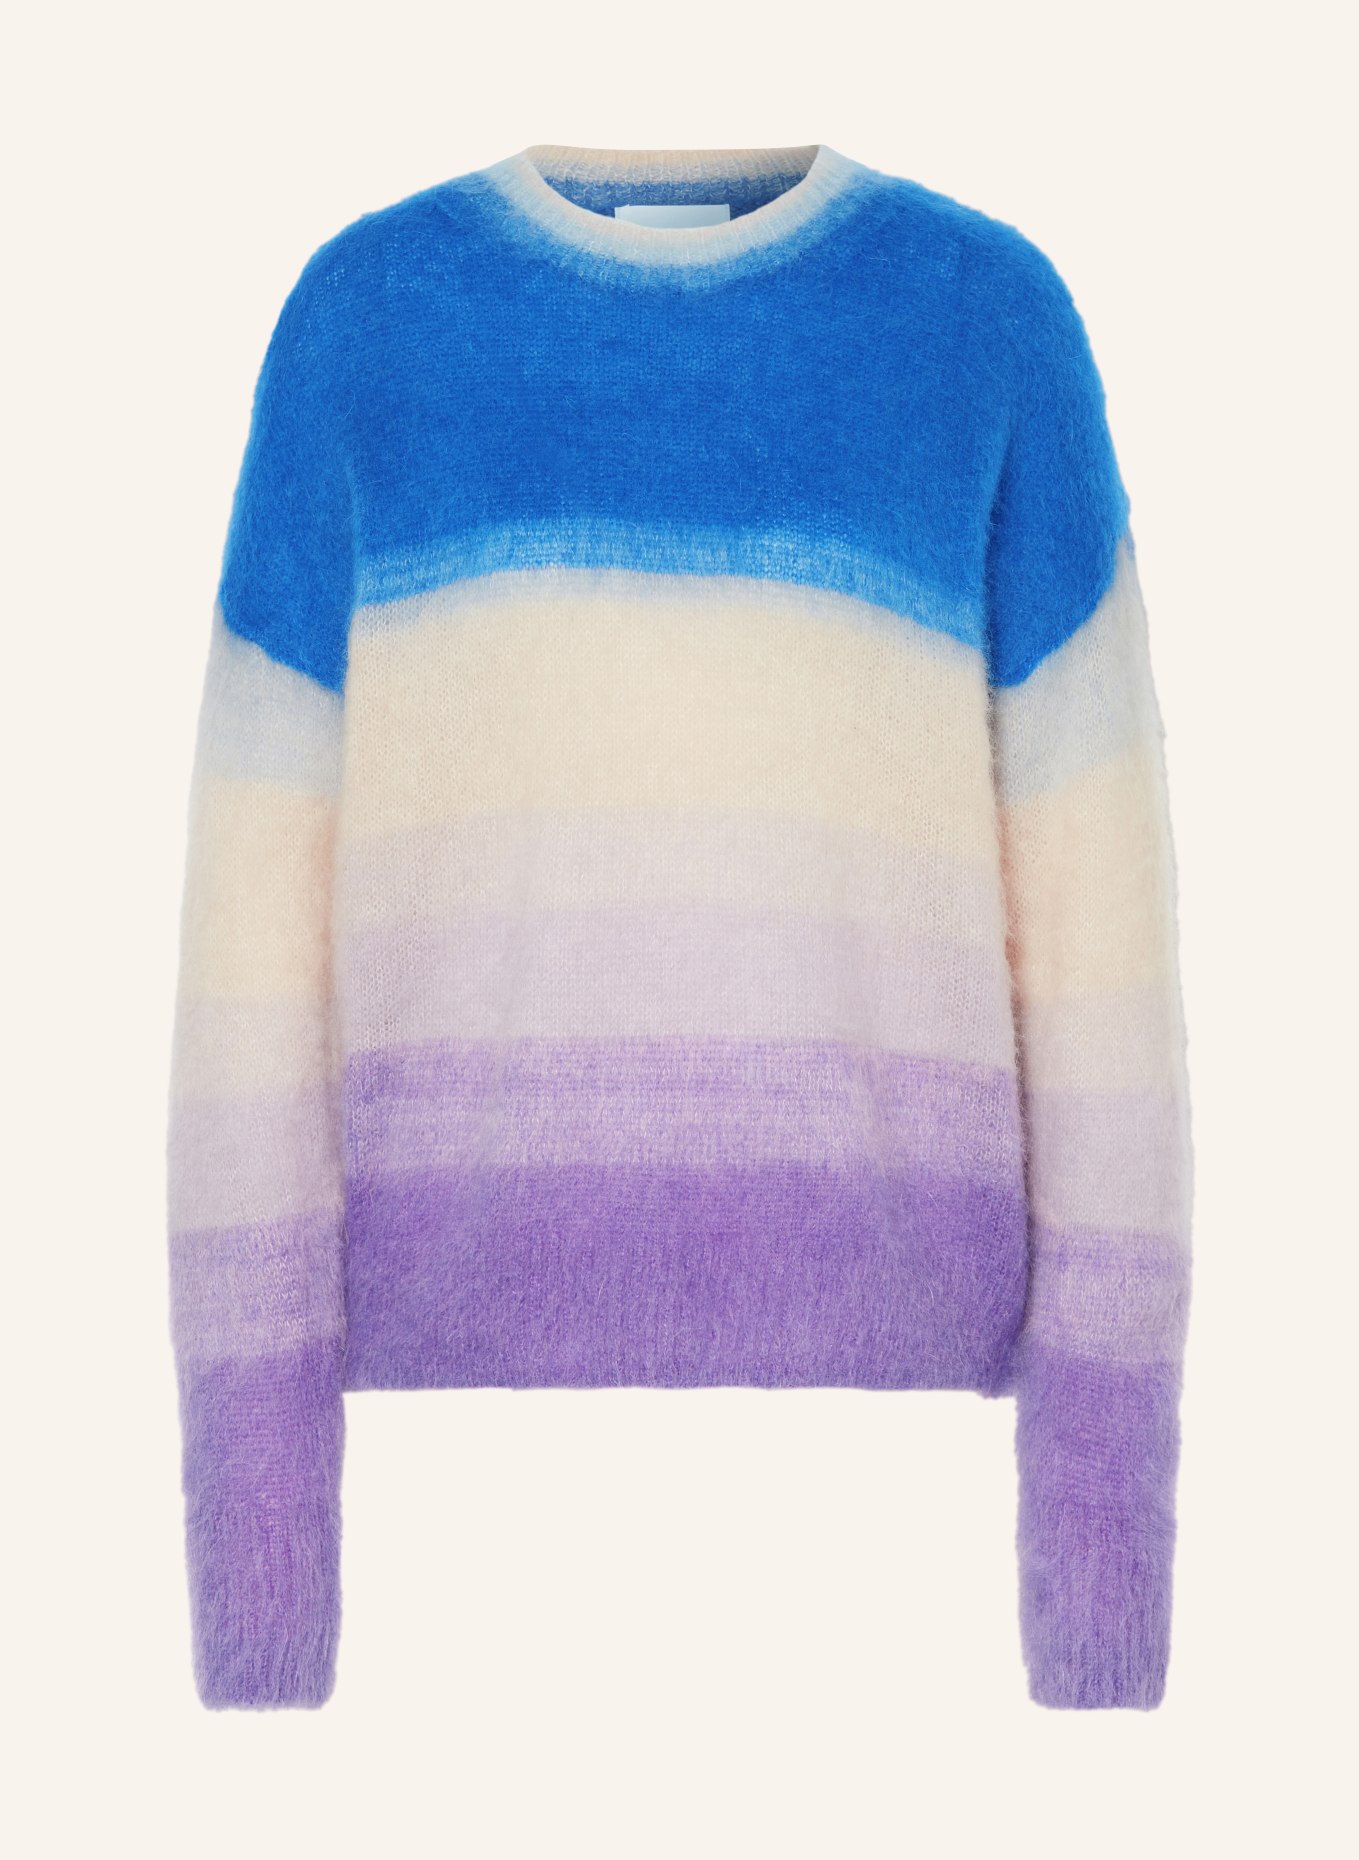 MARANT ÉTOILE Sweater DRUSSELL with mohair, Color: BLUE/ WHITE/ PURPLE (Image 1)